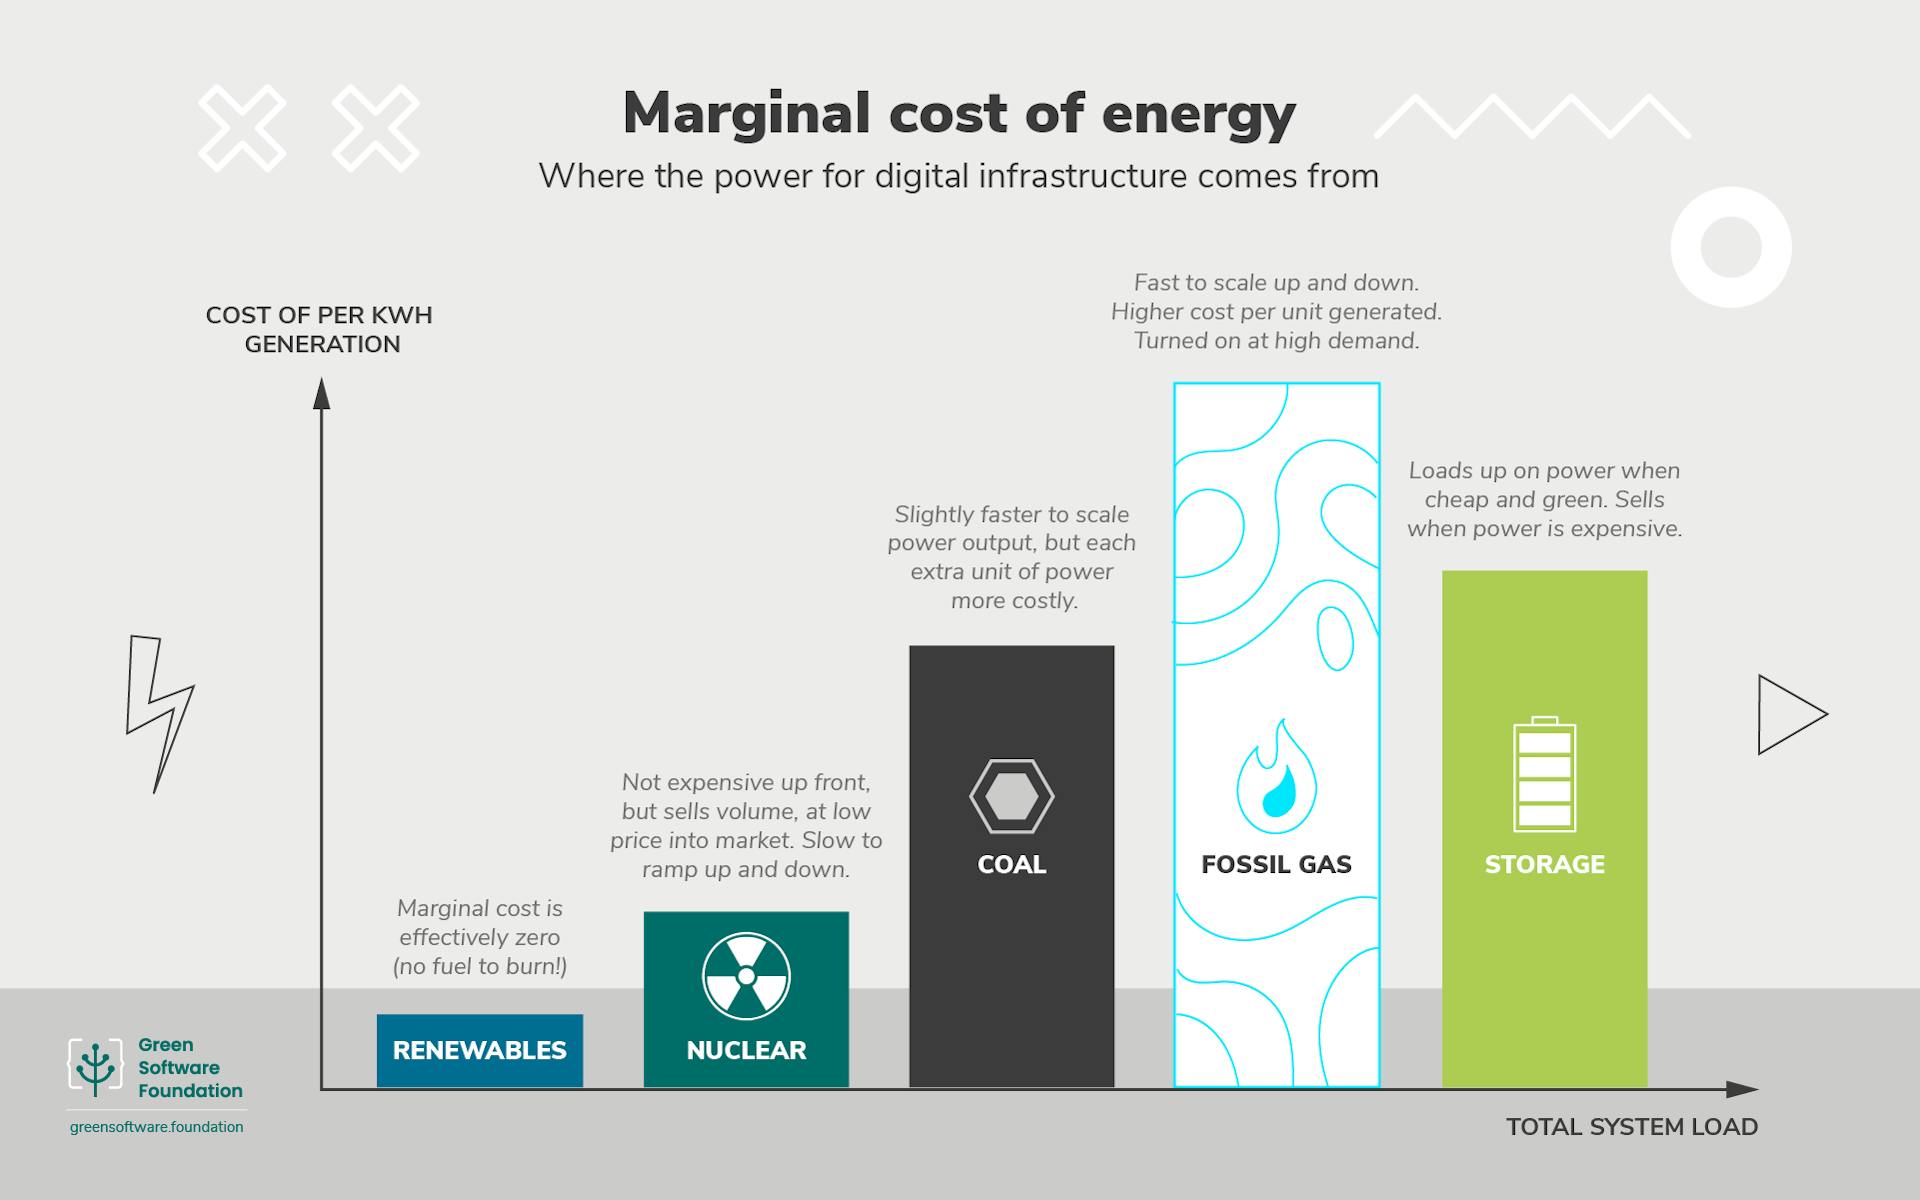 Illustation-comparing-marginal-costs-of-nuclear-and-fossil-fuels-with-renewables-and storage-in-the-mix 